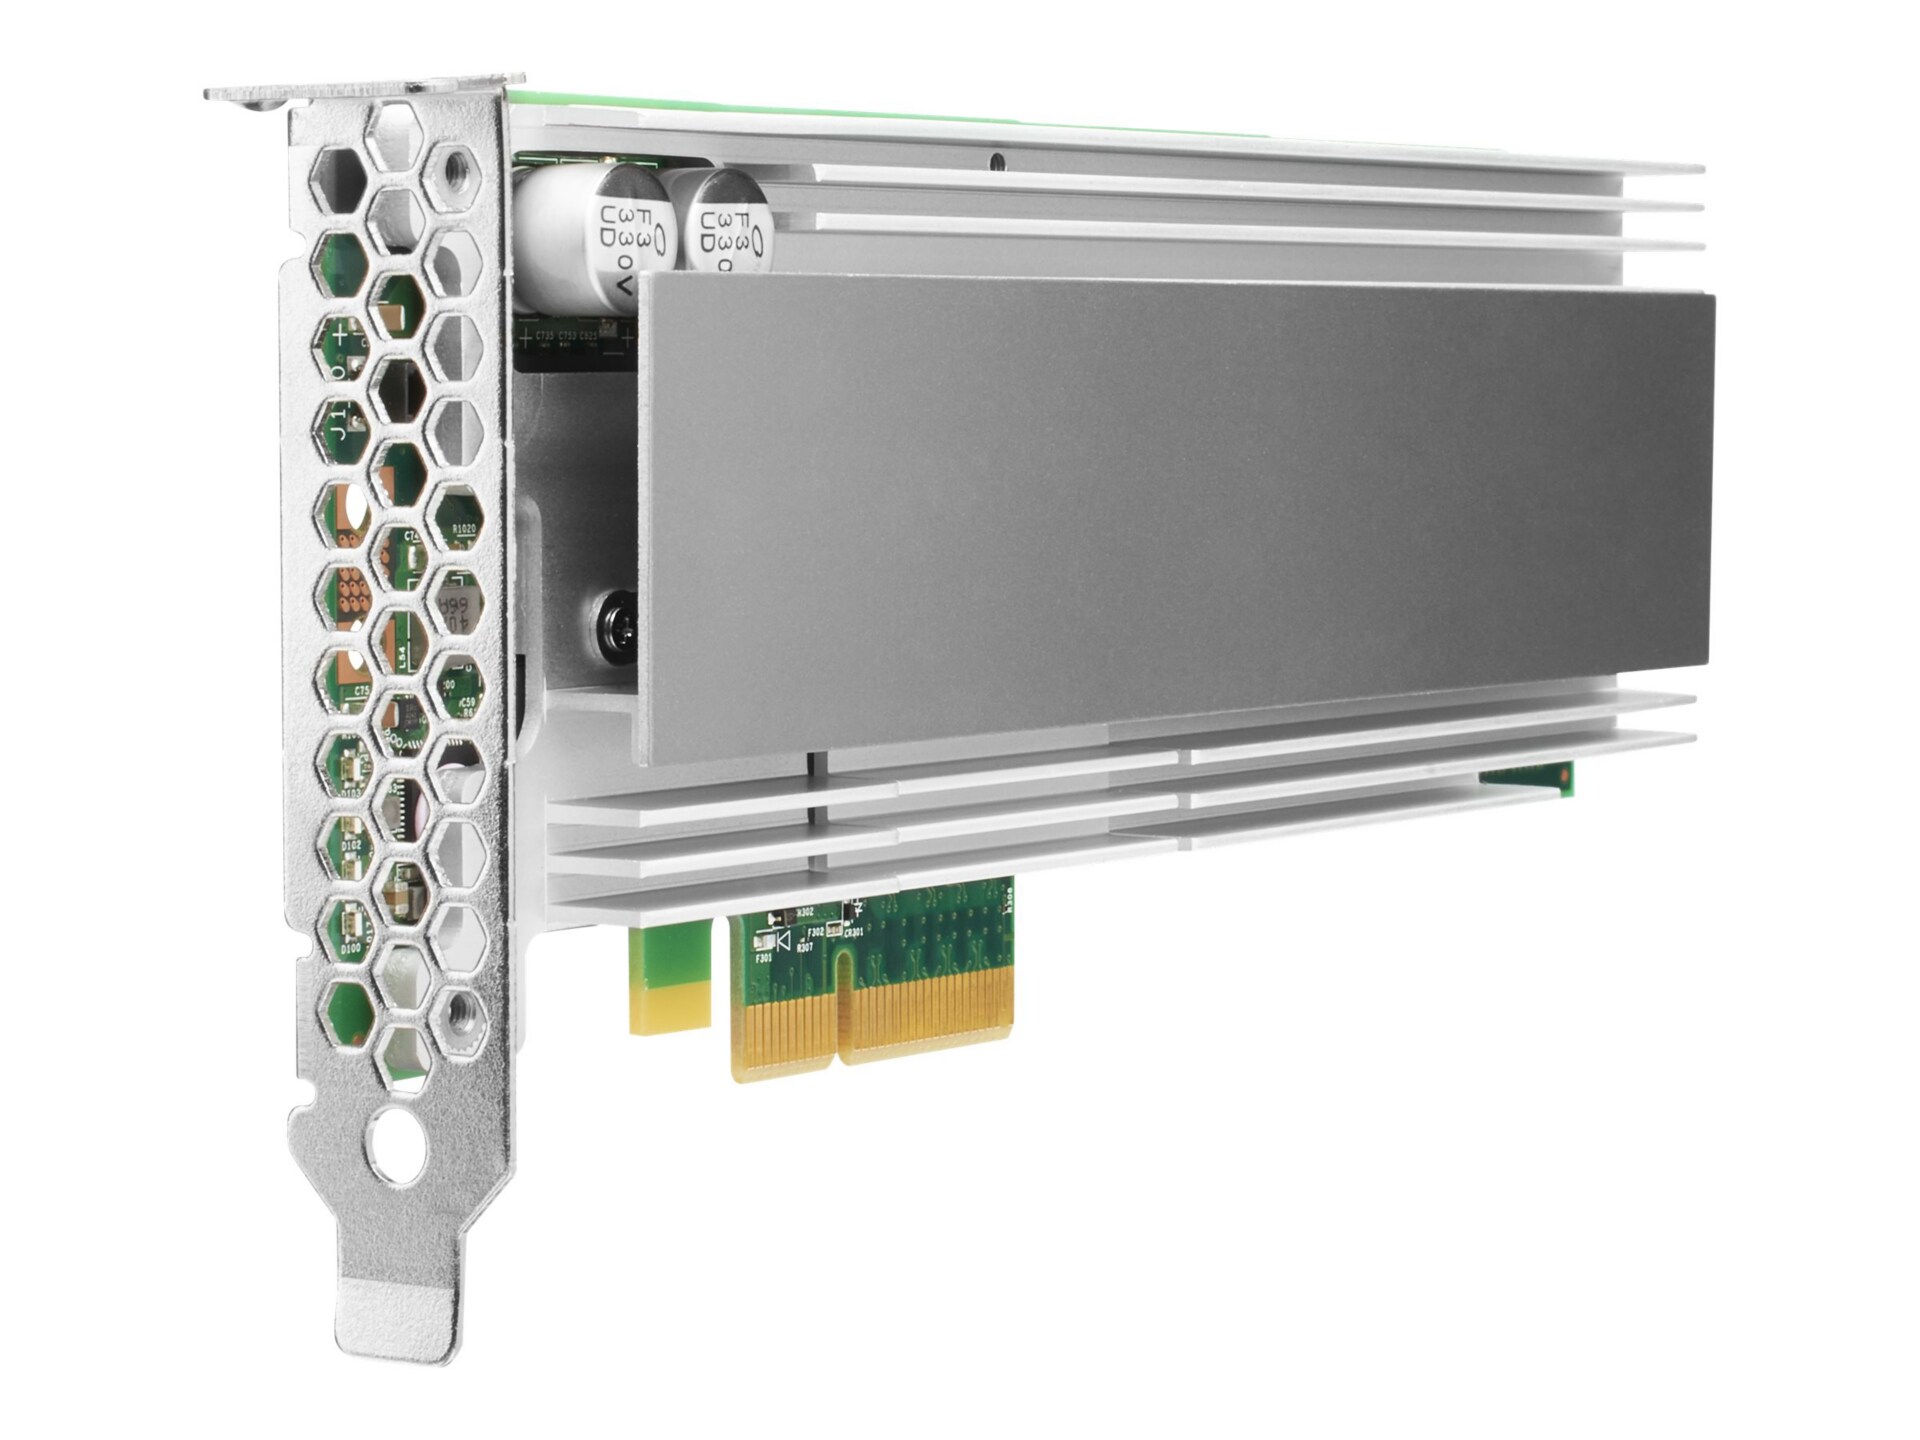 HPE Mixed Use - solid state drive - 1.6 TB - PCI Express x8 (NVMe)